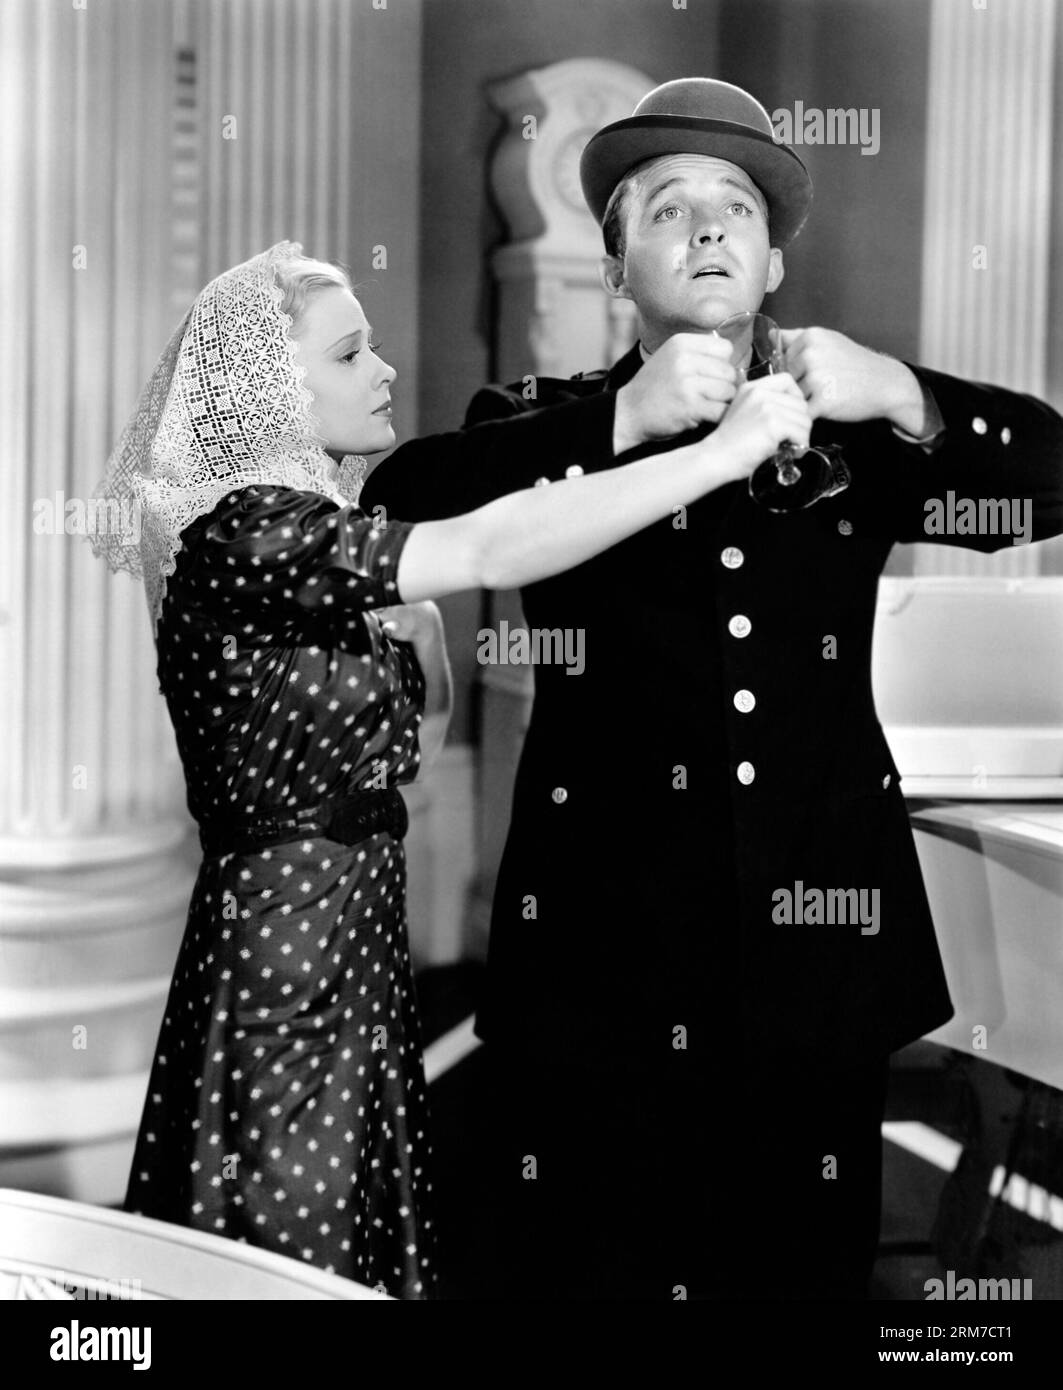 MARY CARLISLE and BING CROSBY in DOCTOR RHYTHM (1938), directed by FRANK TUTTLE. Credit: PARAMOUNT PICTURES / Album Stock Photo